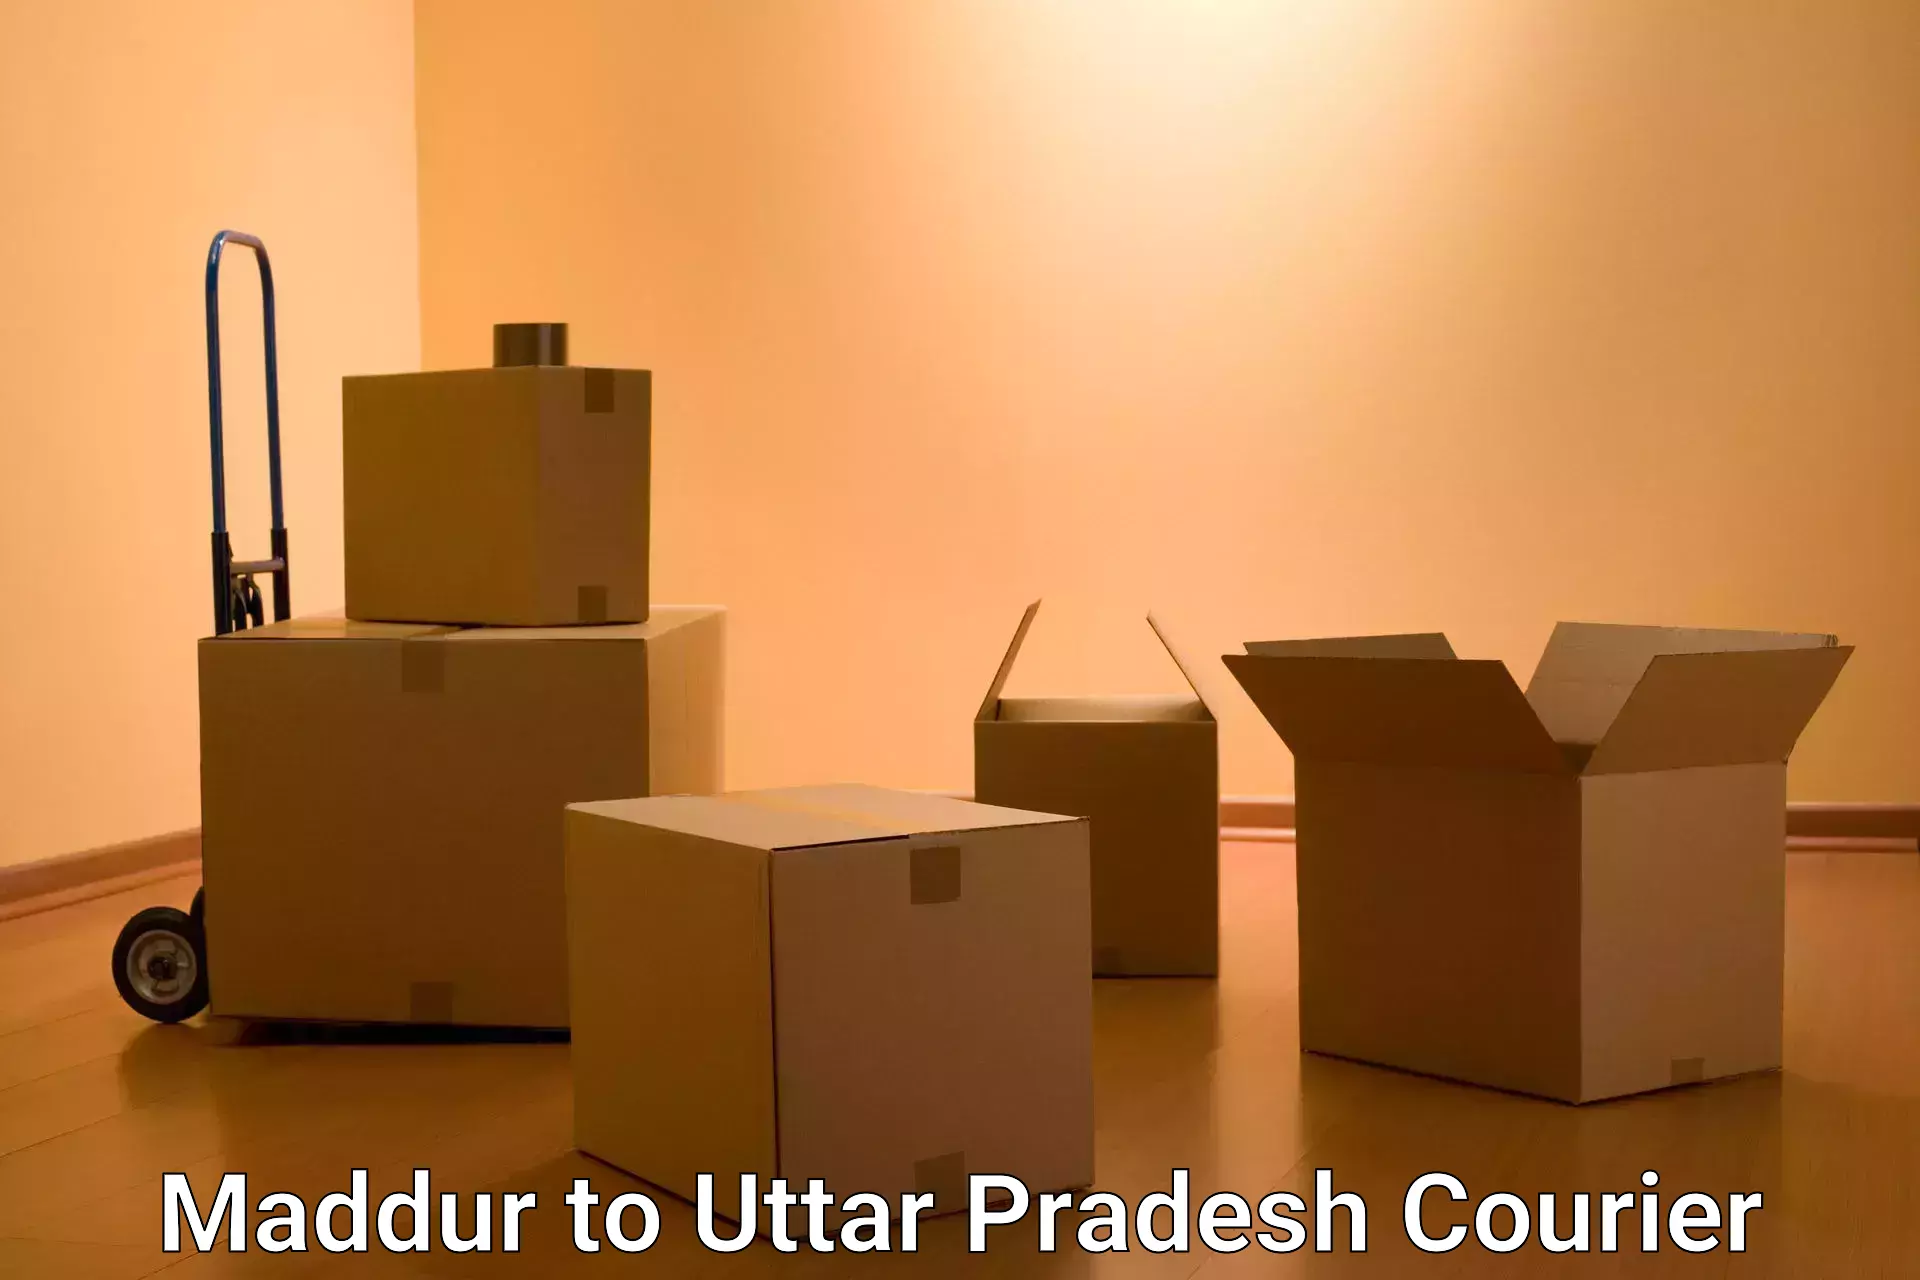 Comprehensive shipping network Maddur to IIT Kanpur